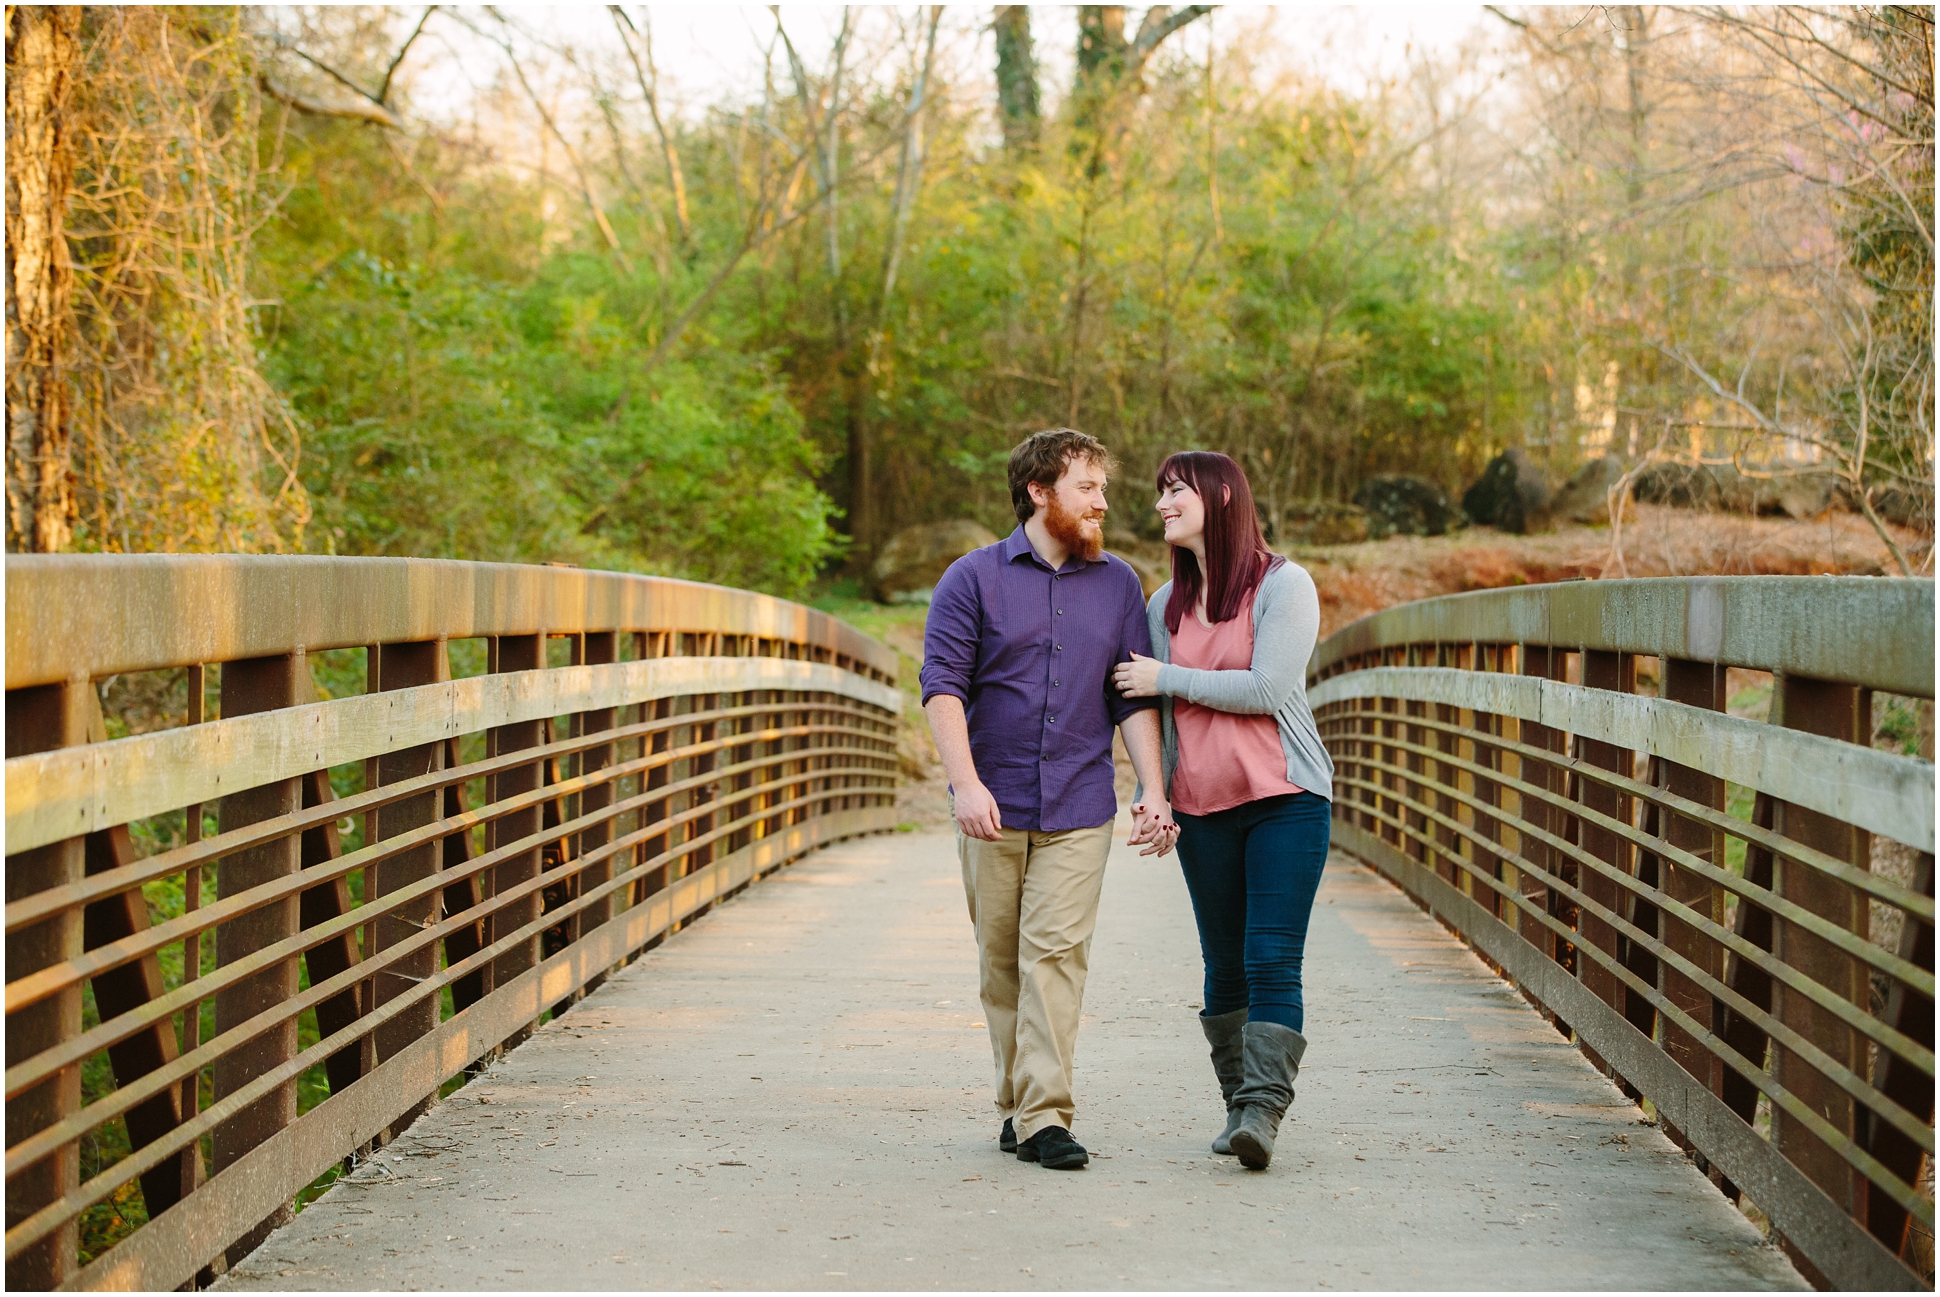 Two Chics Photography | Creature Comforts Brewery Engagement Session Athens Georgia | www.twochicsphotography.com